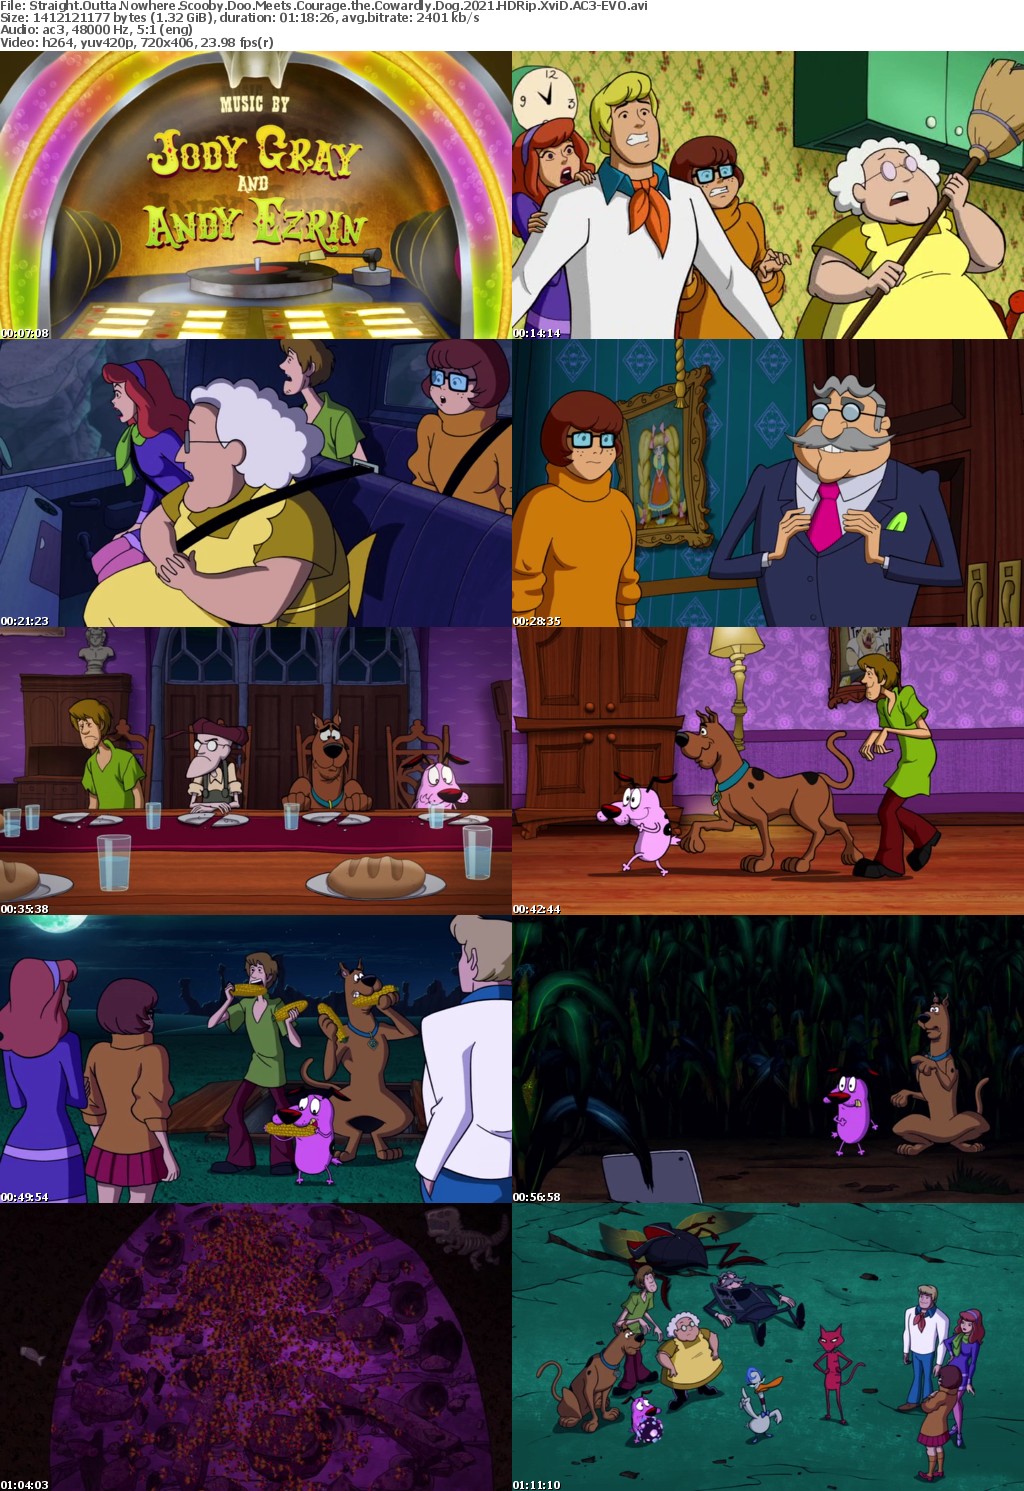 Straight Outta Nowhere Scooby Doo Meets Courage the Cowardly Dog 2021 HDRip XviD AC3-EVO